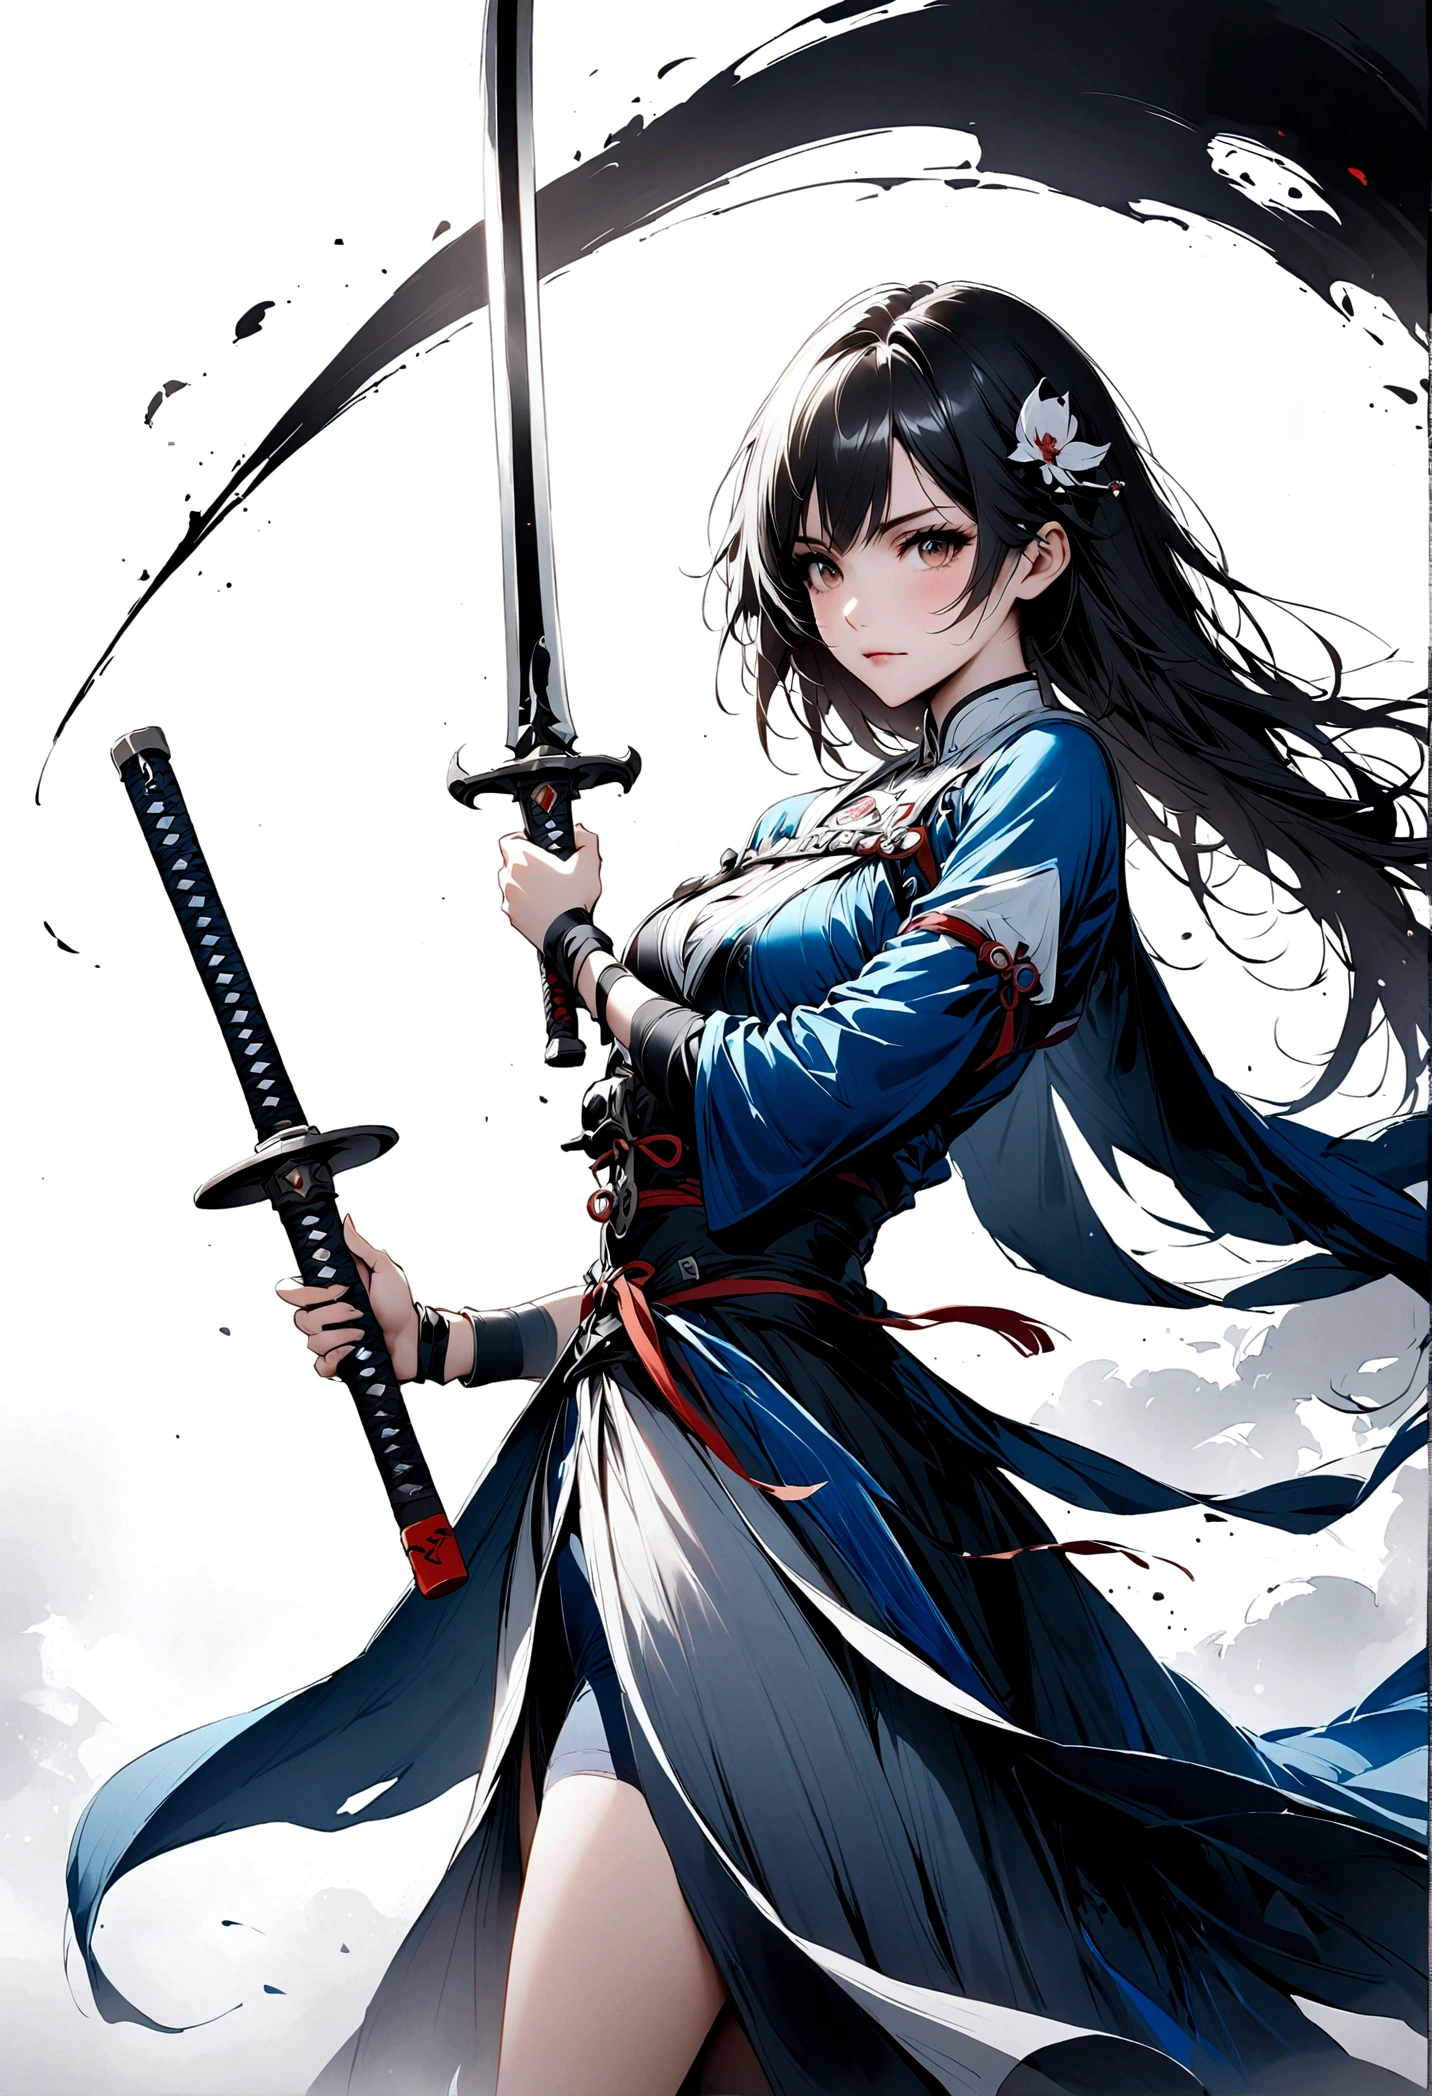 Artistic ink painting，Three-dimensional ink painting，Minimalism，Minimalist graphics，Minimal Art，Anime girl holding a sword，whole body，Chinese style，antiquity，Ink Painting，Blue robe，Black long hair，Black and white background，古韵White Space，White Space，大面积White Space，Texture Matte，Low saturation，Minimalist composition，Master composition